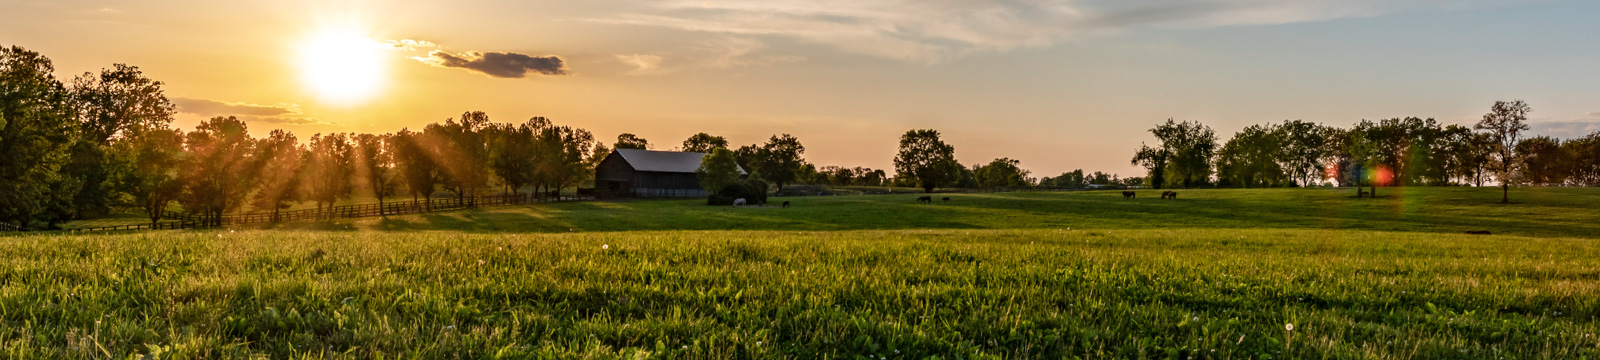 Image of sunset over farm field.